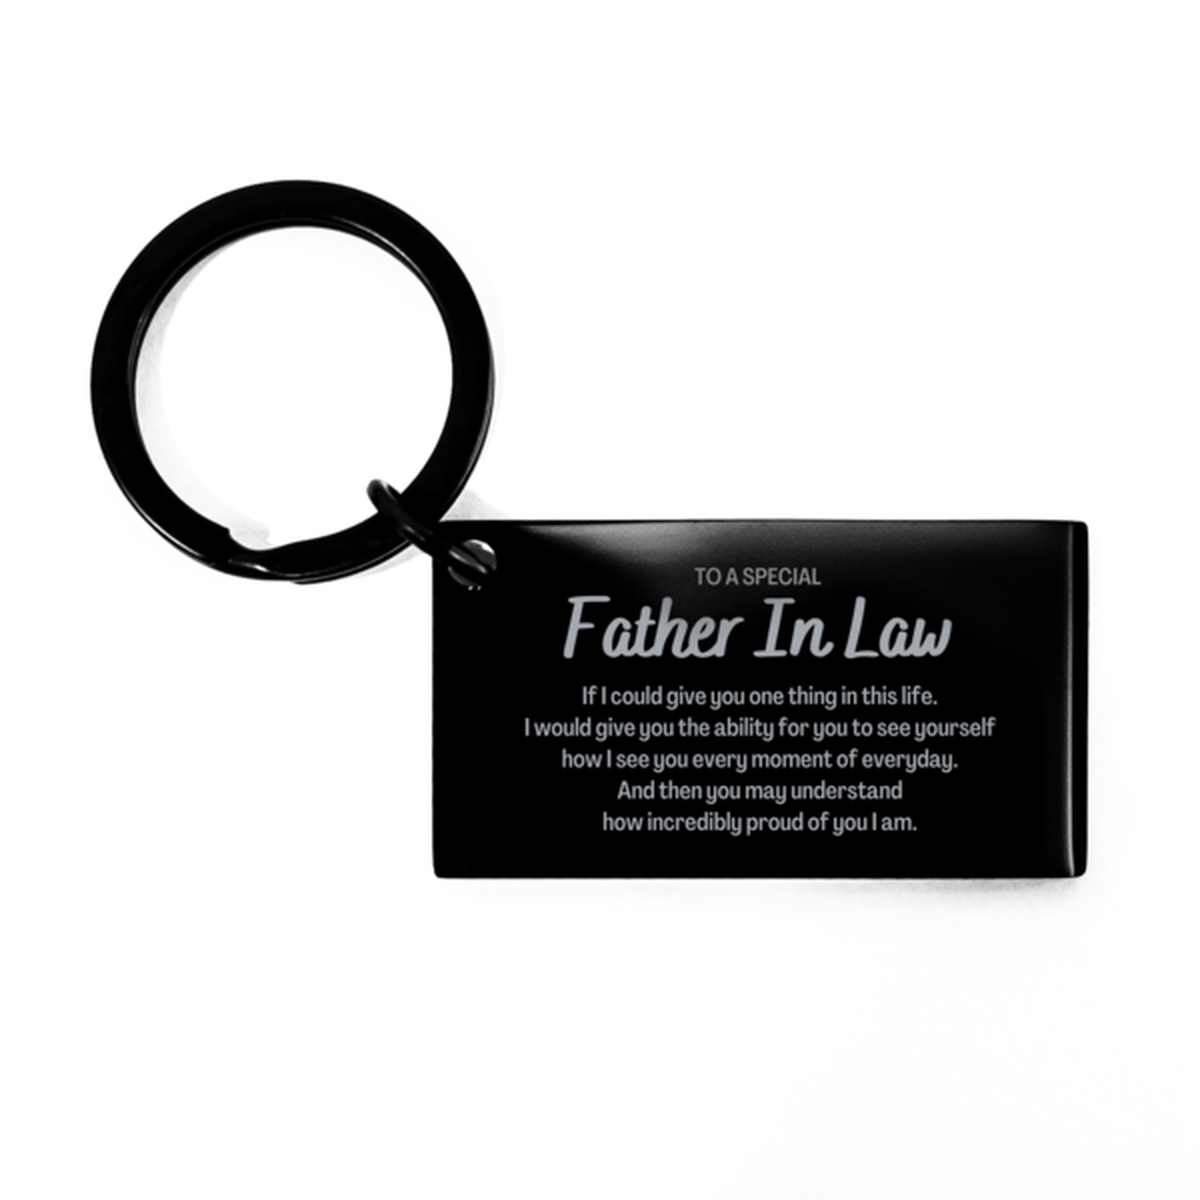 To My Father In Law Keychain, Gifts For Father In Law Engraved, Inspirational Gifts for Christmas Birthday, Epic Gifts for Father In Law To A Special Father In Law how incredibly proud of you I am